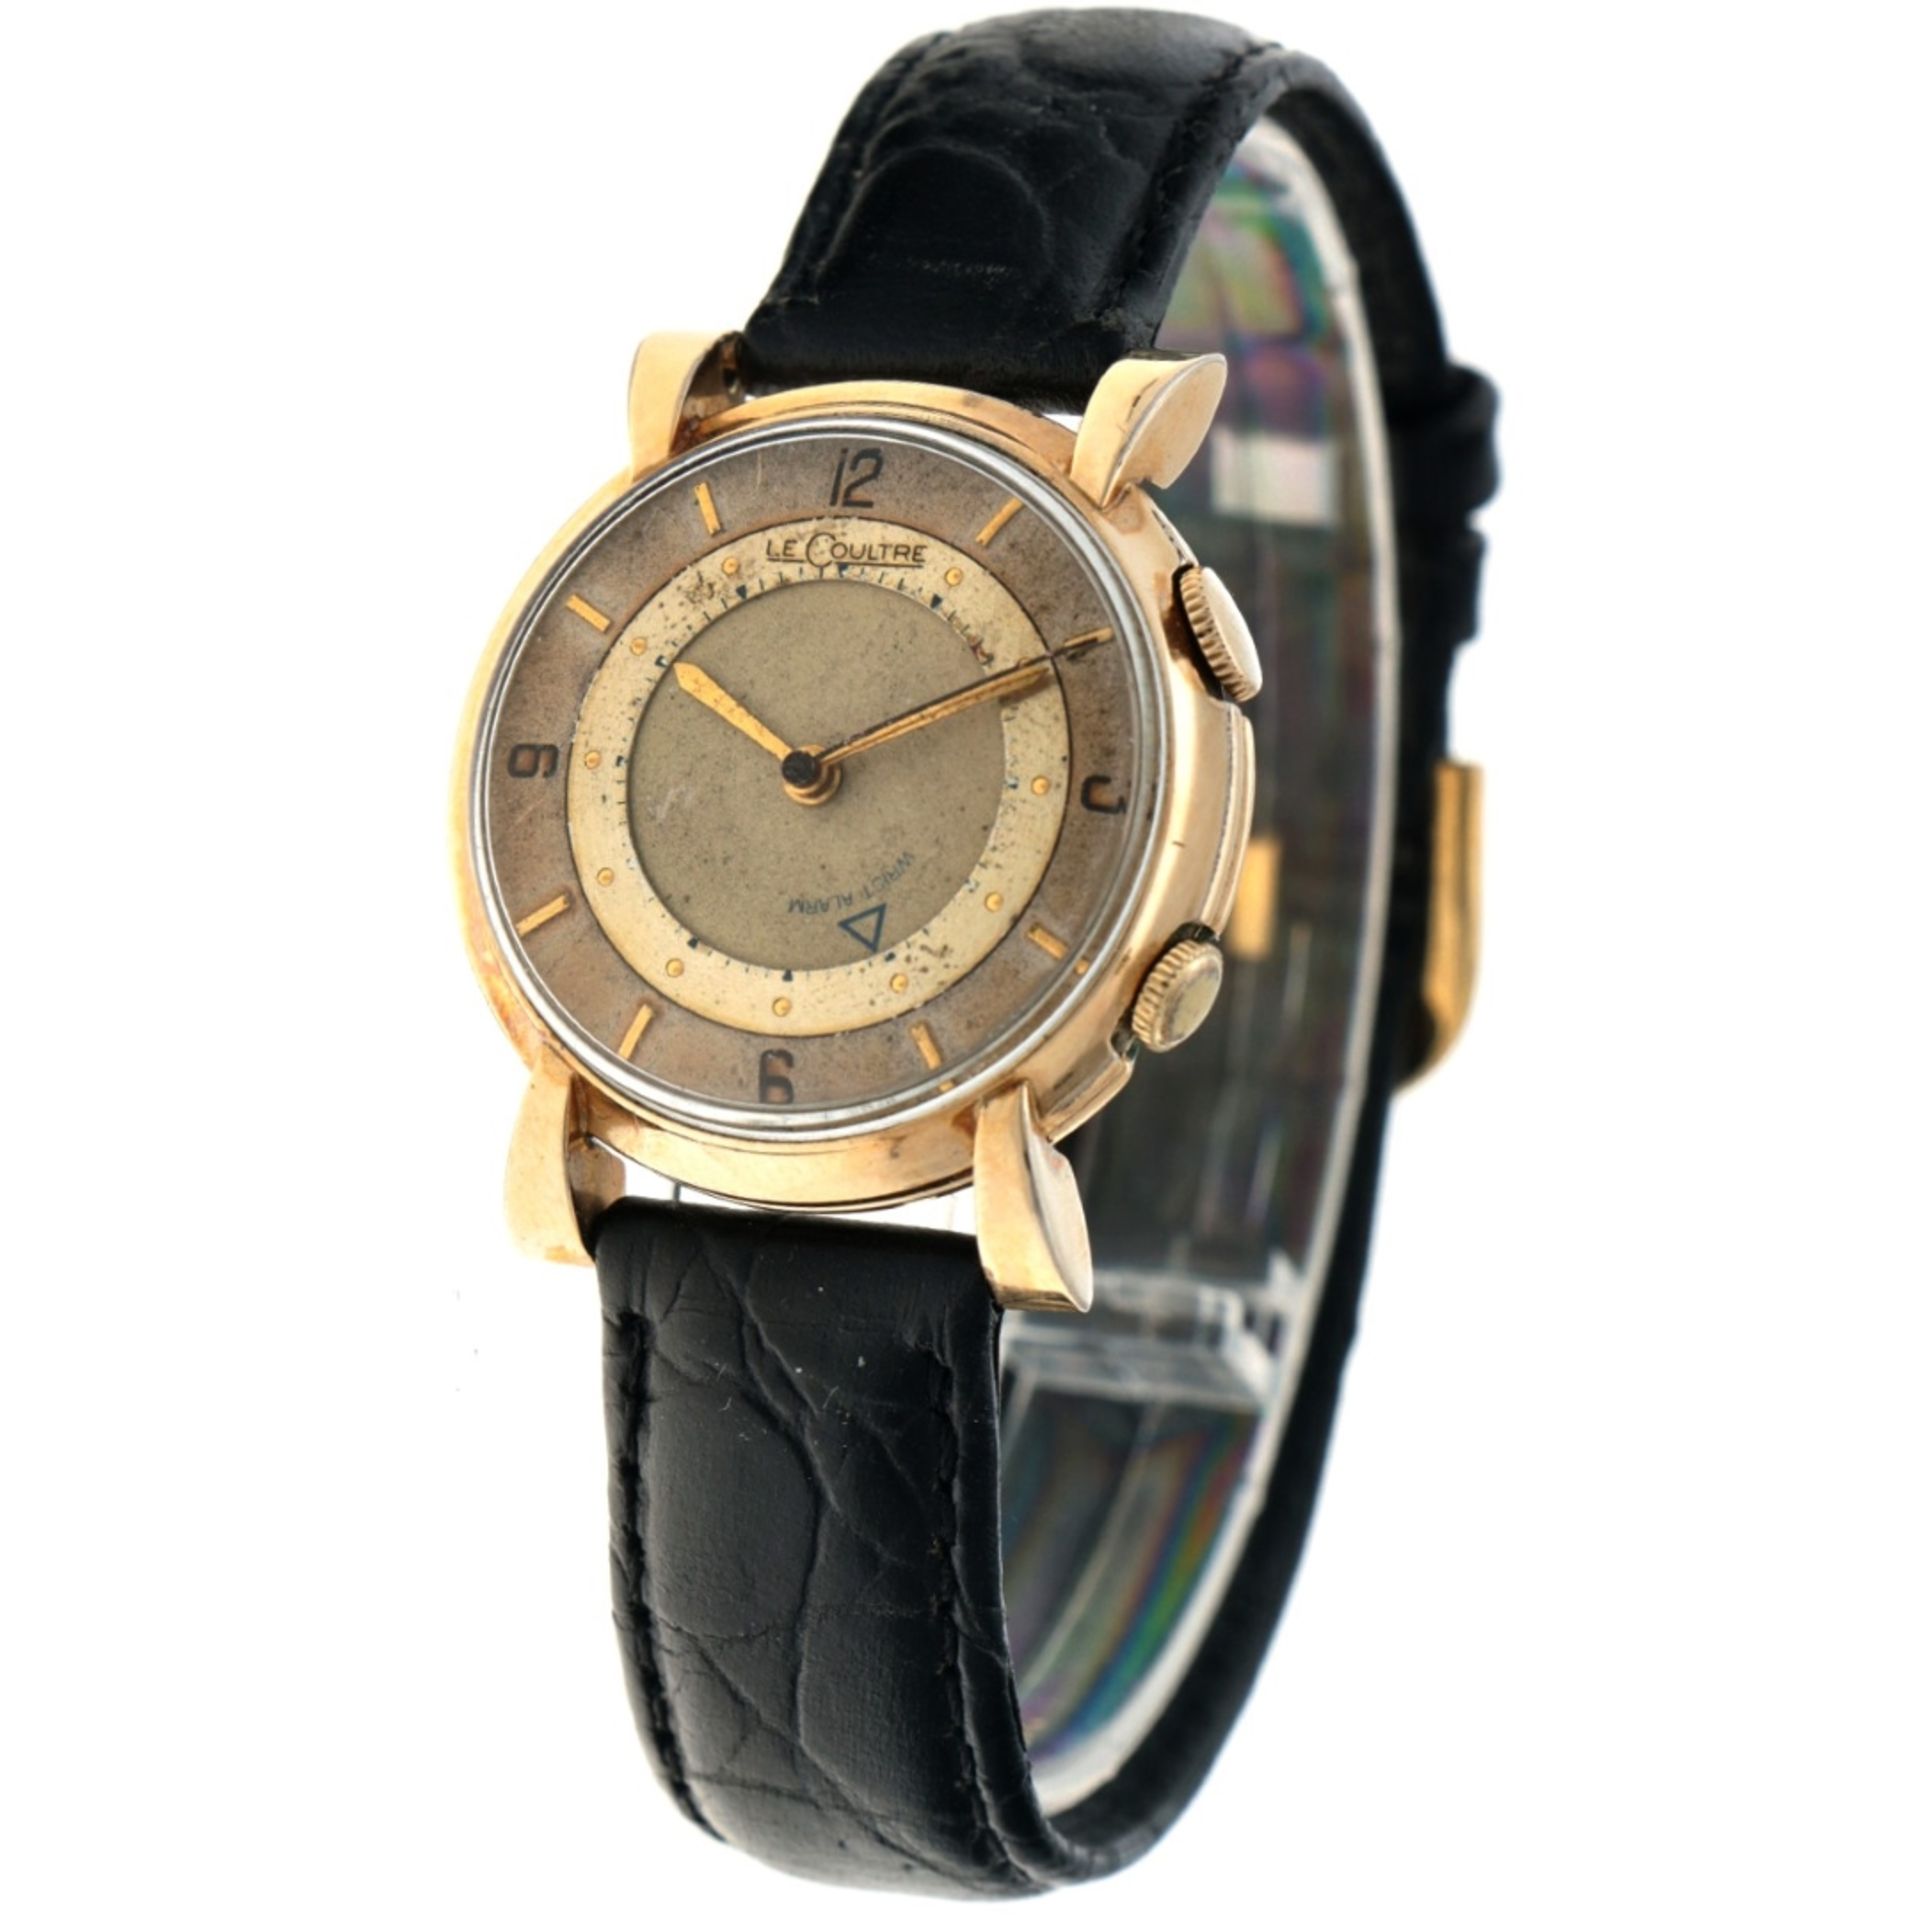 No Reserve - LeCoultre Memovox Cal. 489/1 - Men's watch - approx. 1950's. - Image 2 of 6